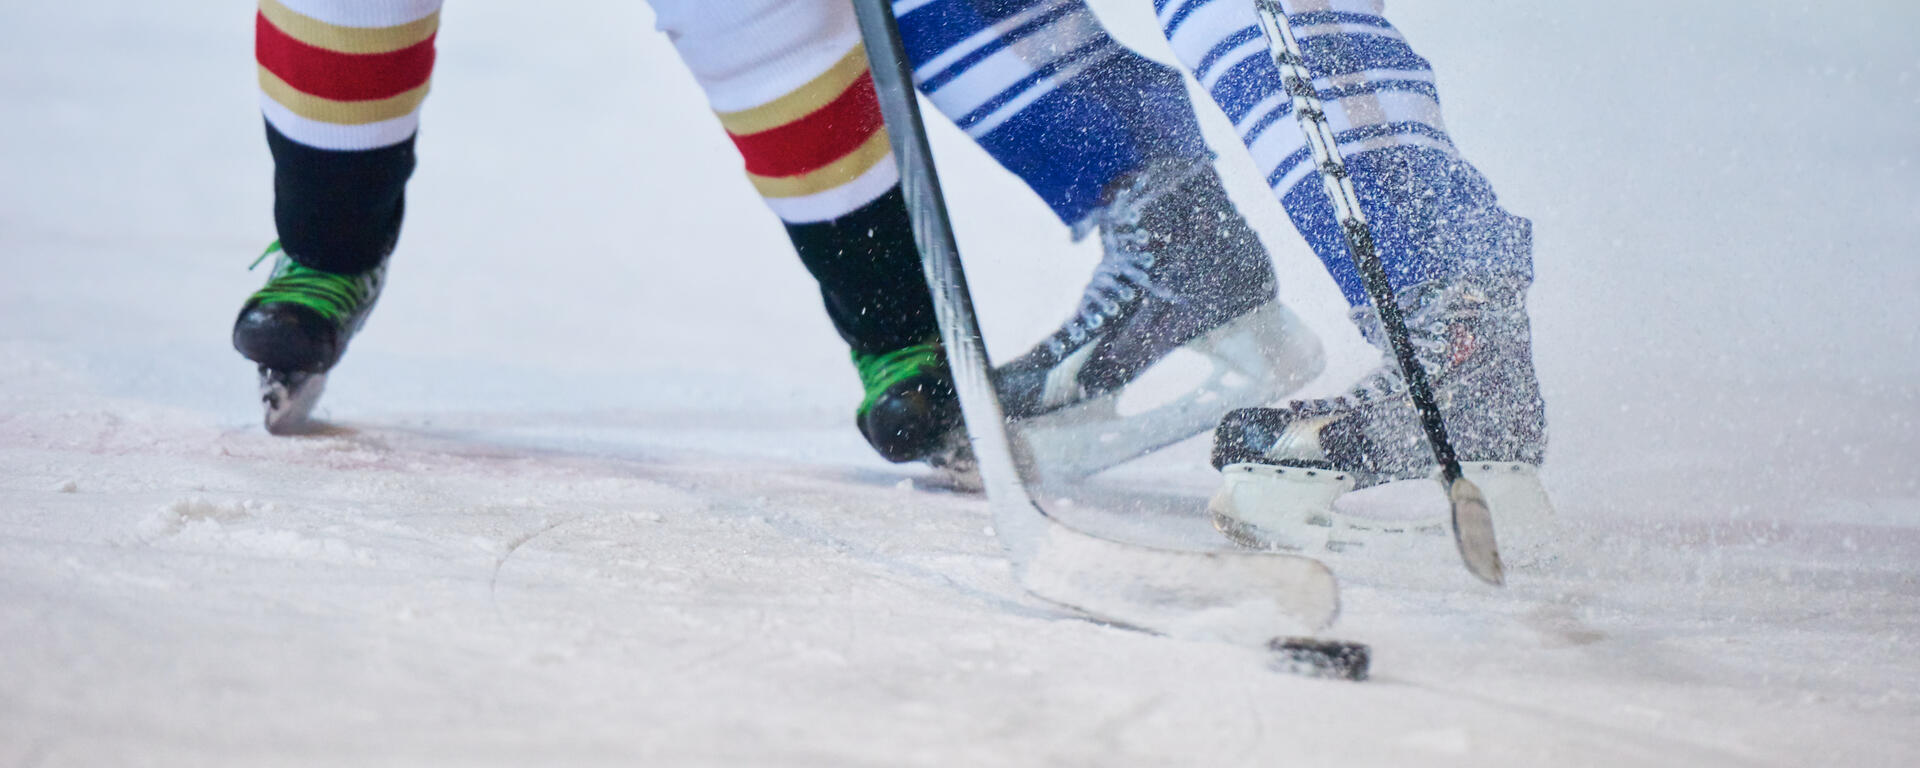 Skates and socks of two hockey players battling for the puck